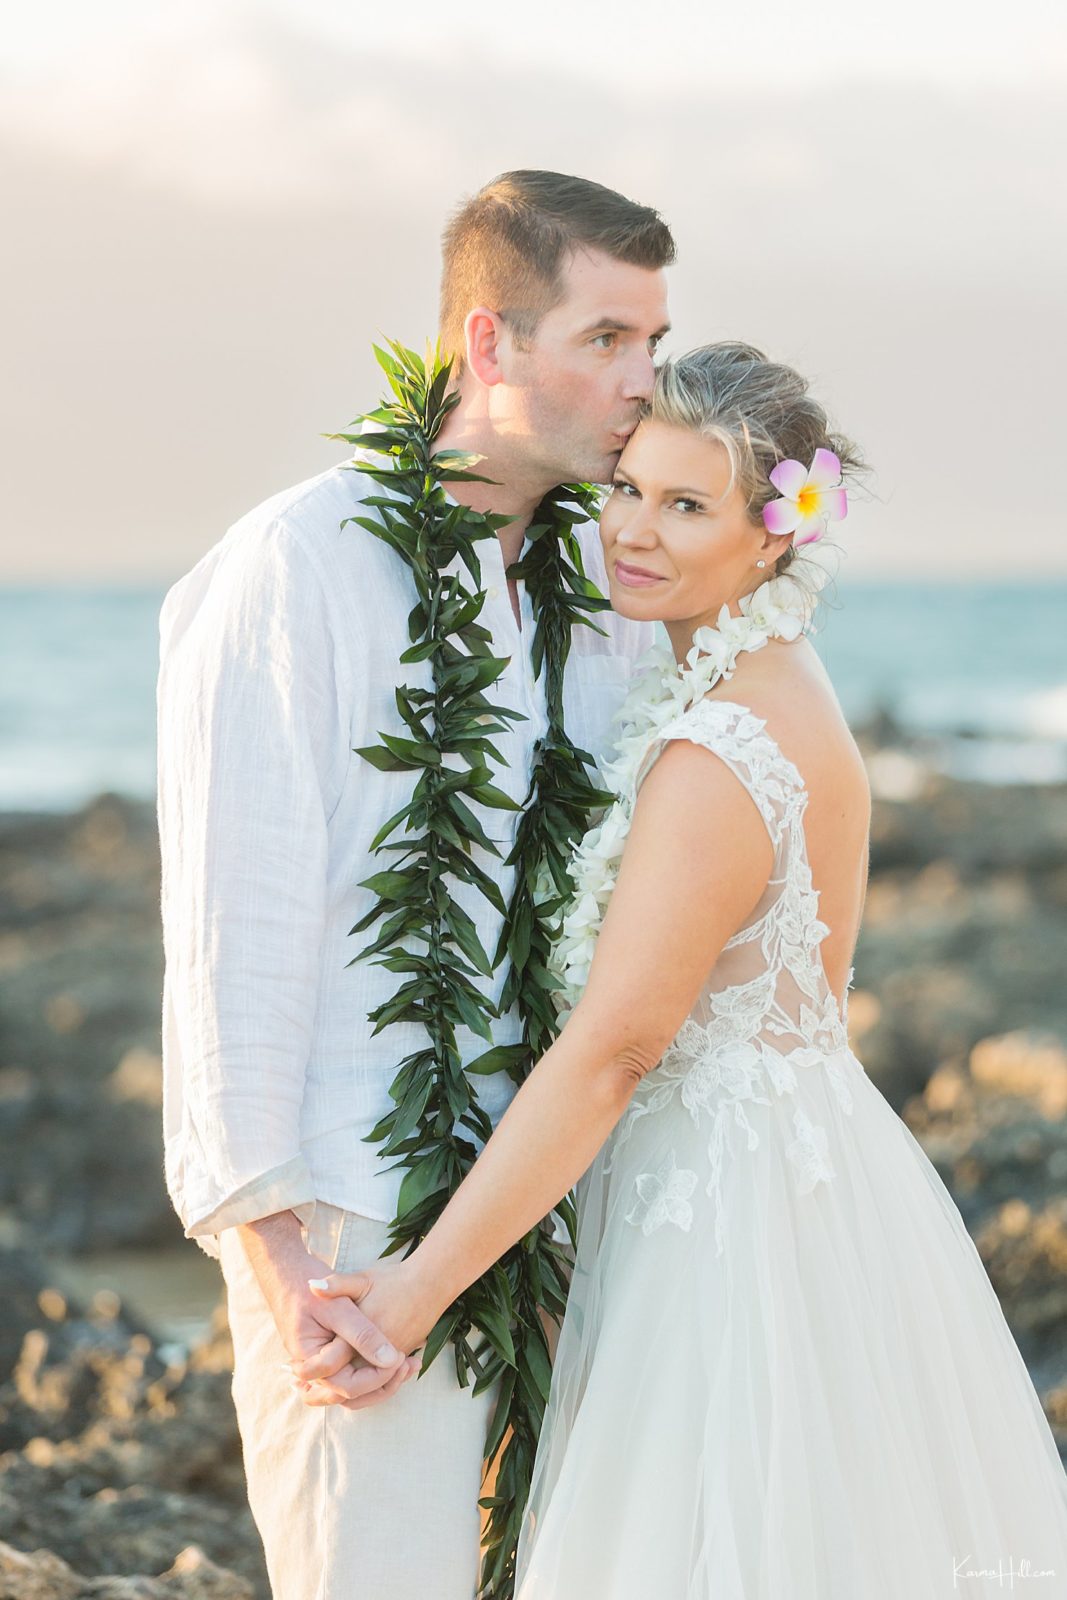 For Us & Our Family - Elizabeth & Dylan's Venue Wedding in Maui